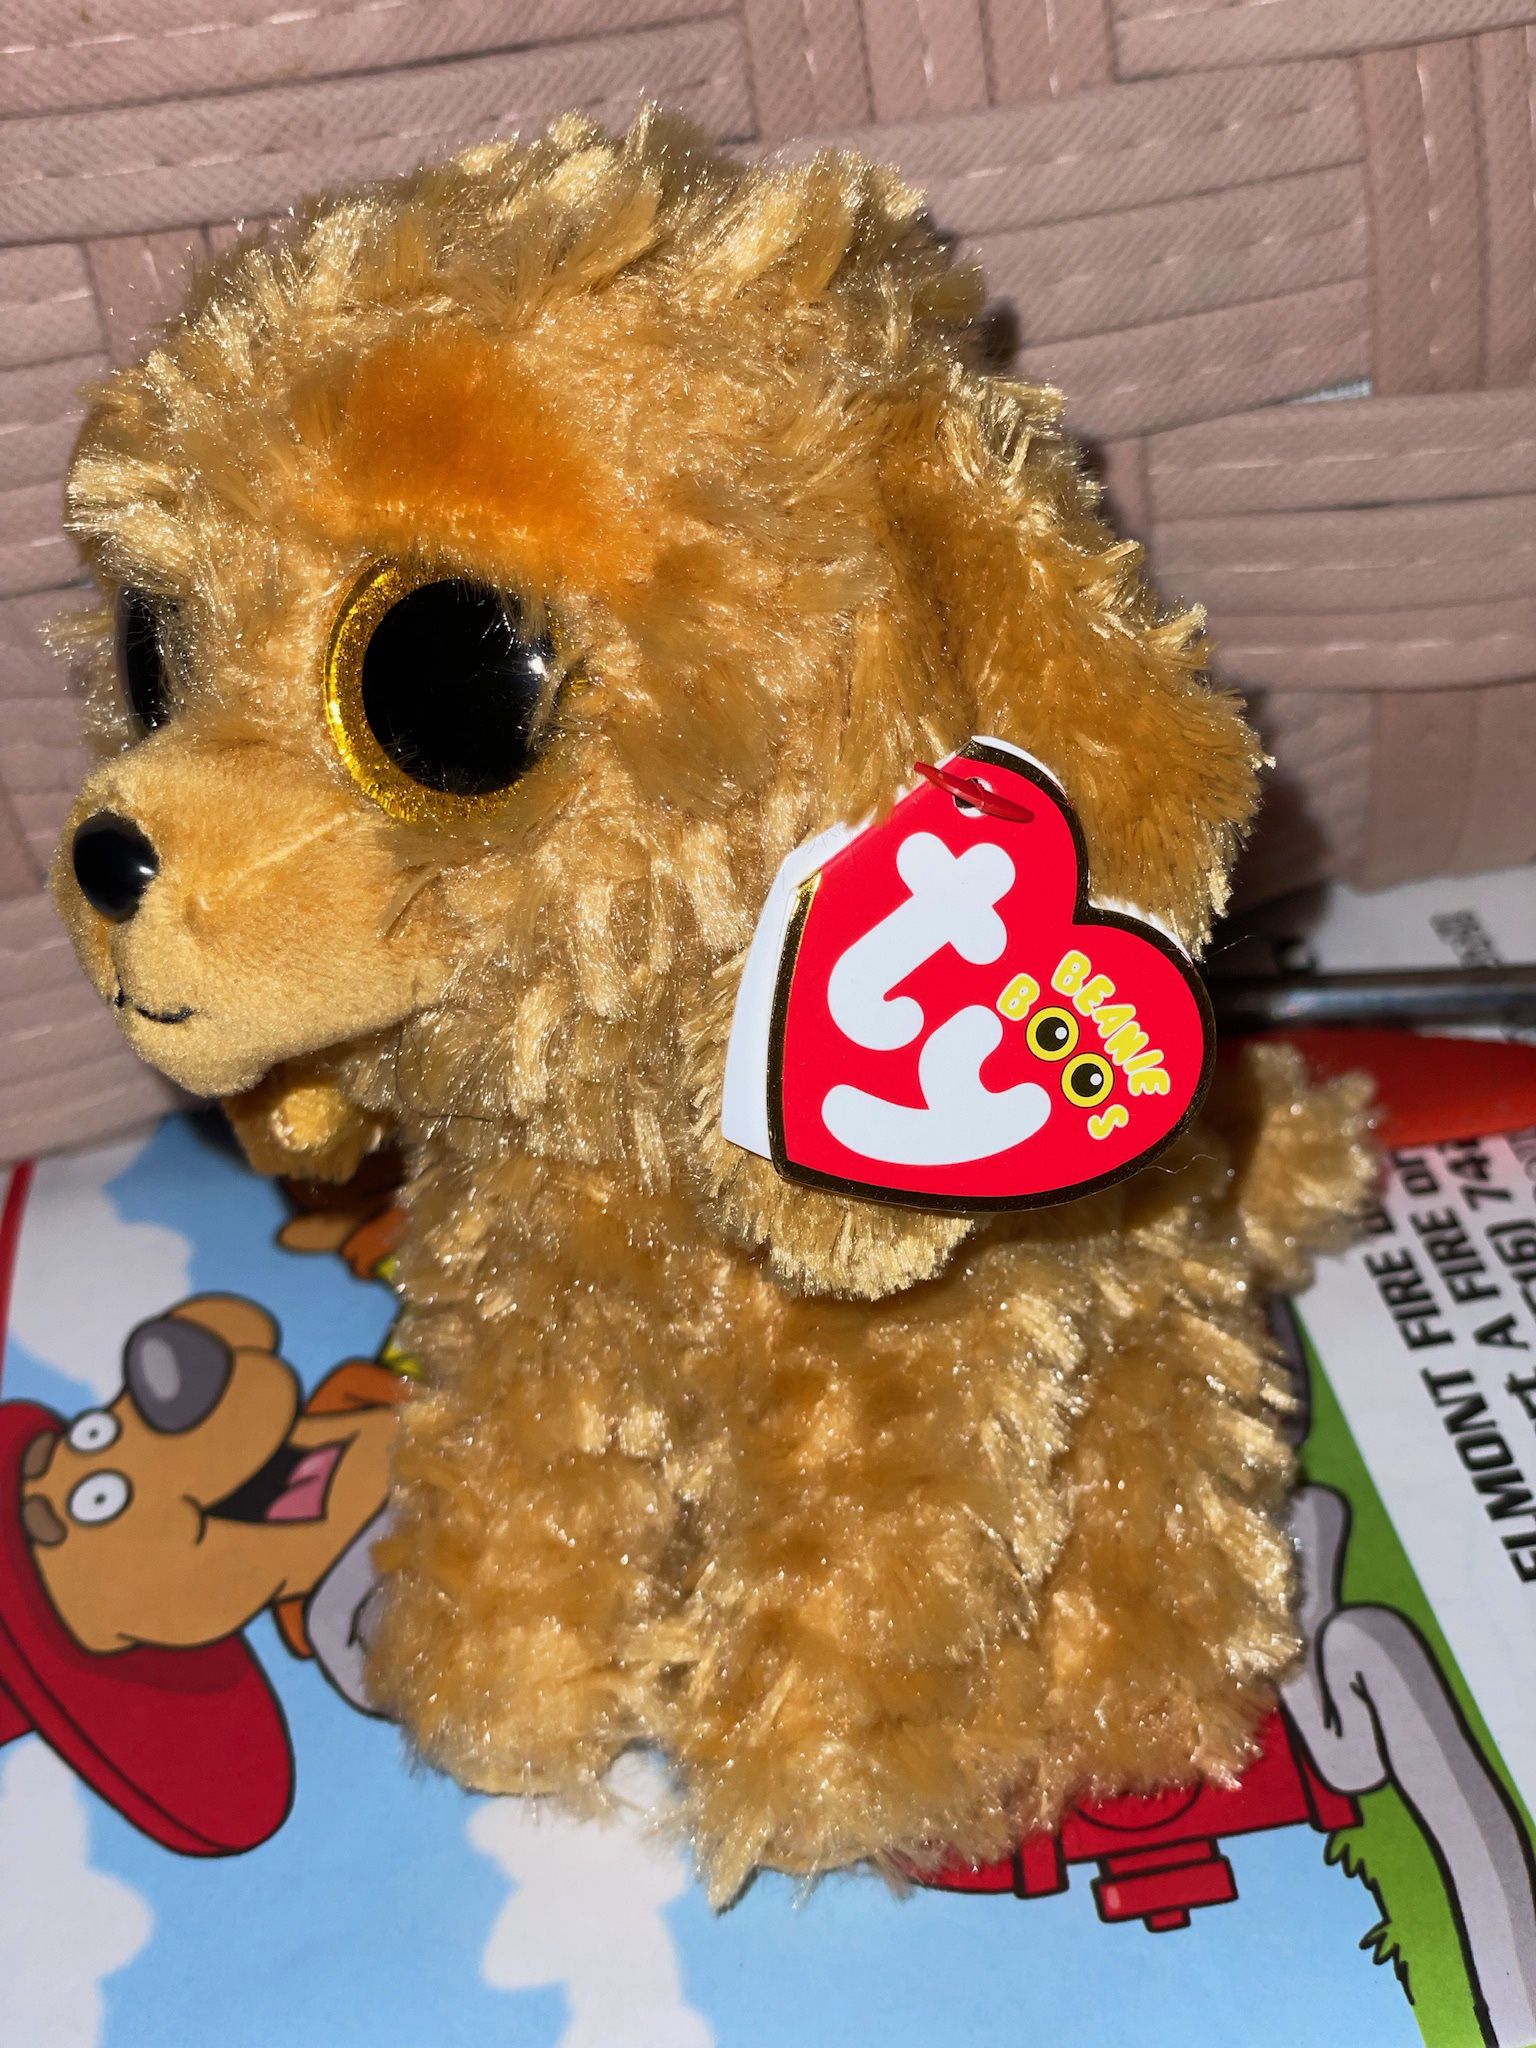 Noodles The Golden doodle 6” Beanie boo (BNWT) 